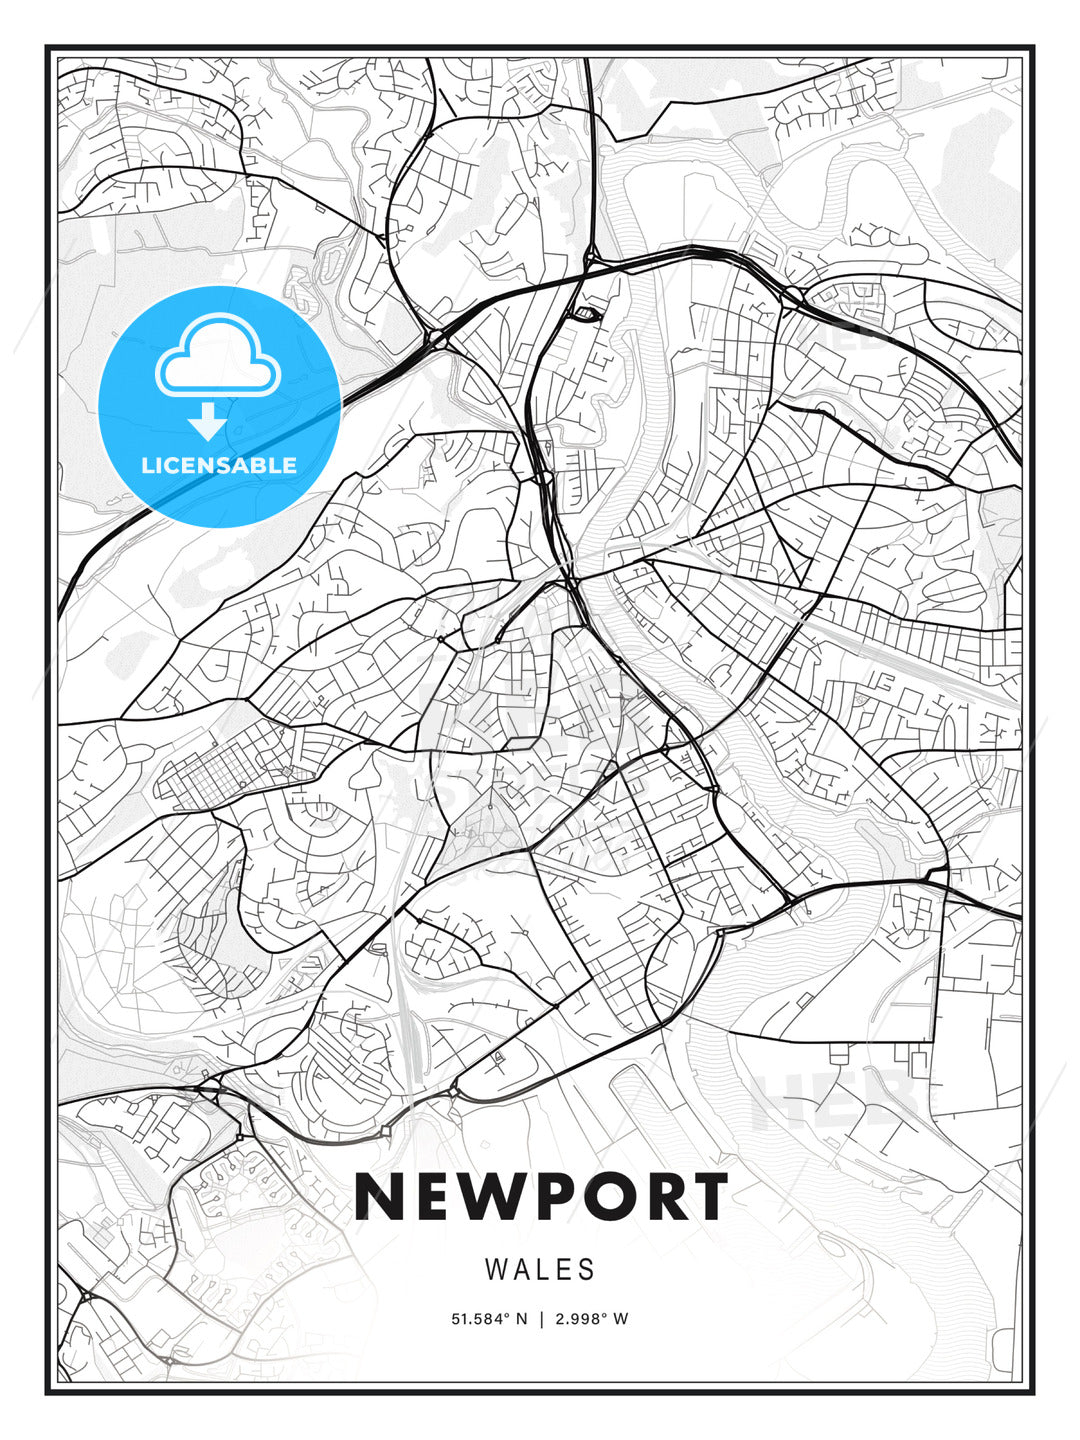 Newport, Wales, Modern Print Template in Various Formats - HEBSTREITS Sketches